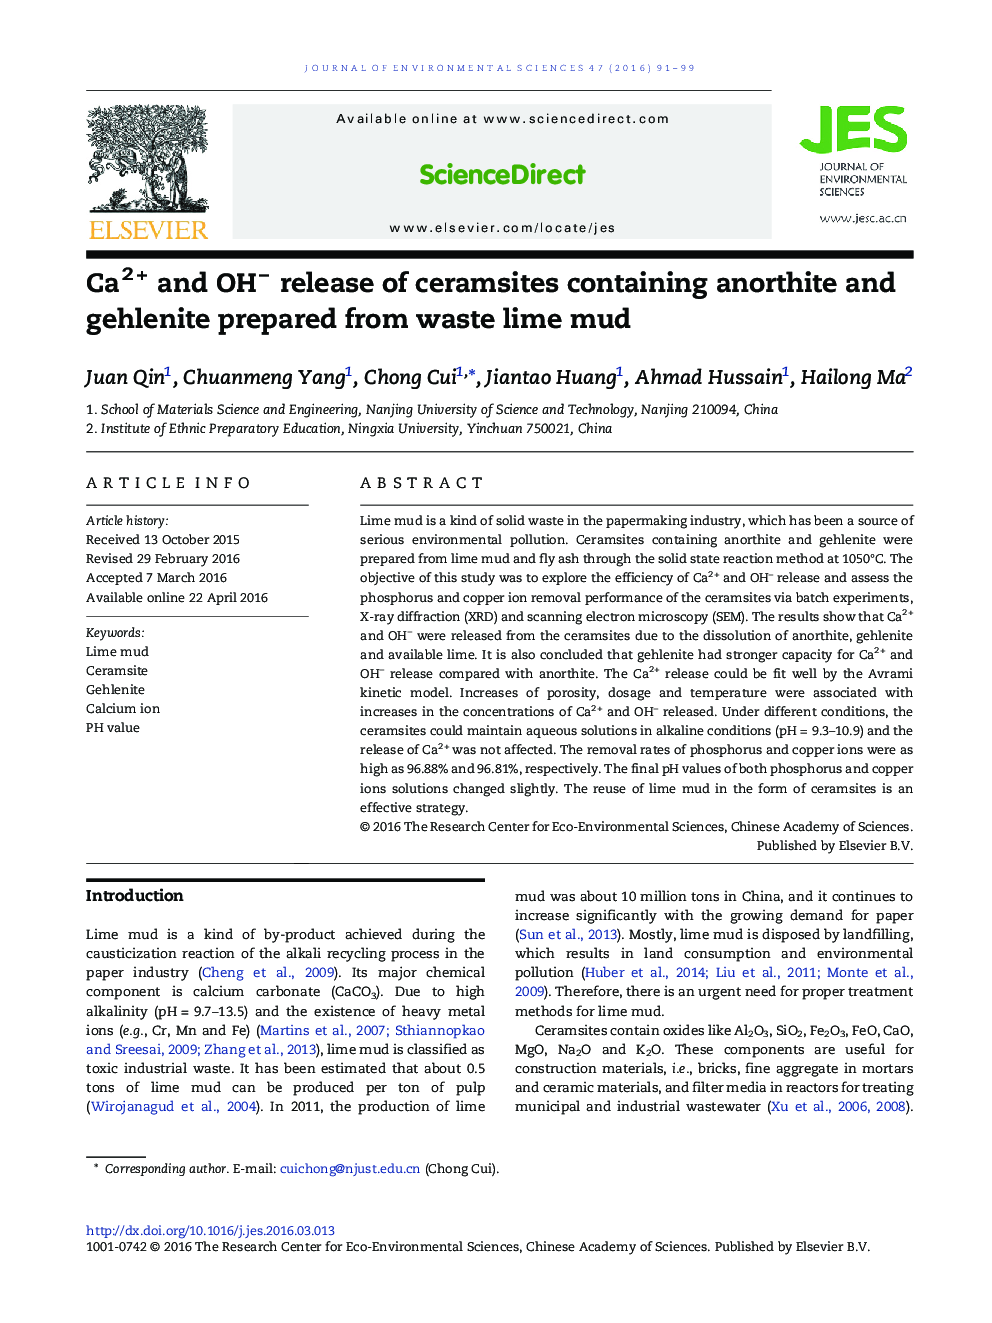 Ca2 + and OH− release of ceramsites containing anorthite and gehlenite prepared from waste lime mud